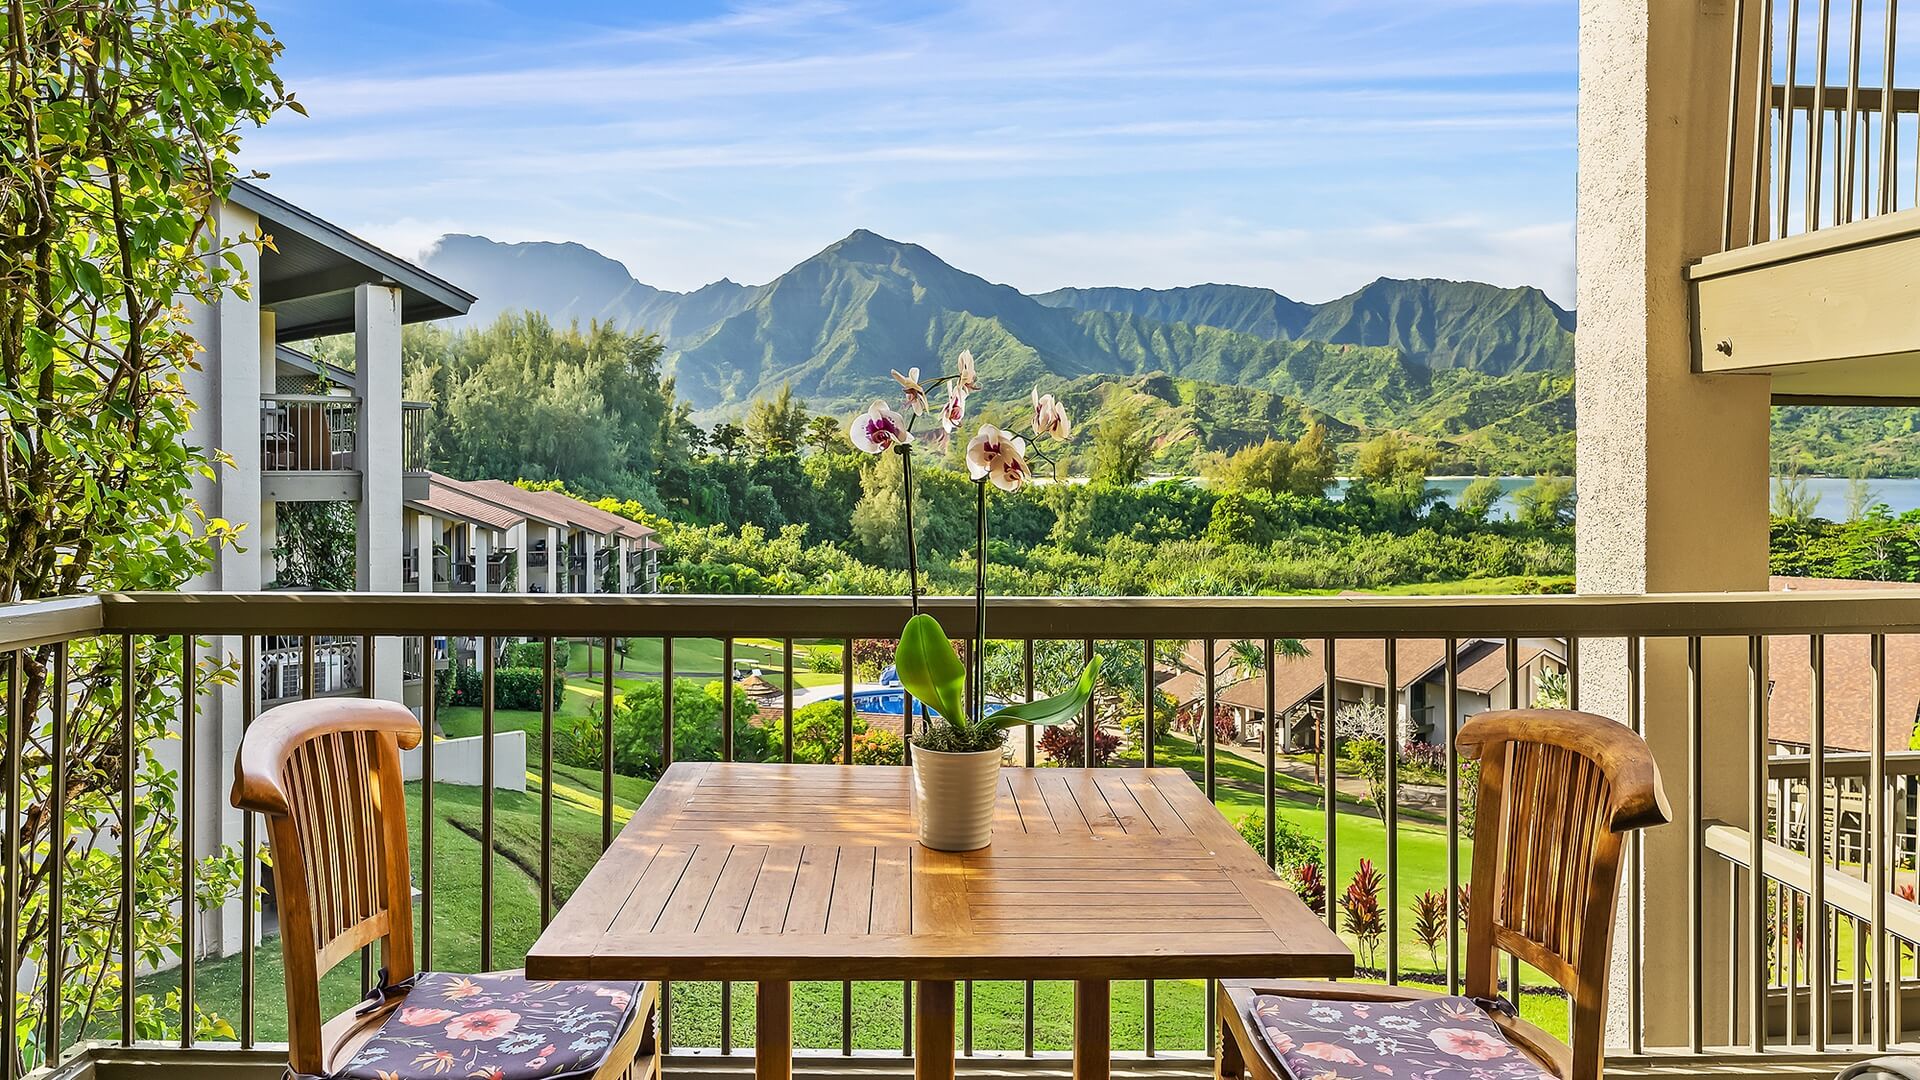 A mountain view from the covered lanai at Hanalei Bay Resort #5201 & 5202